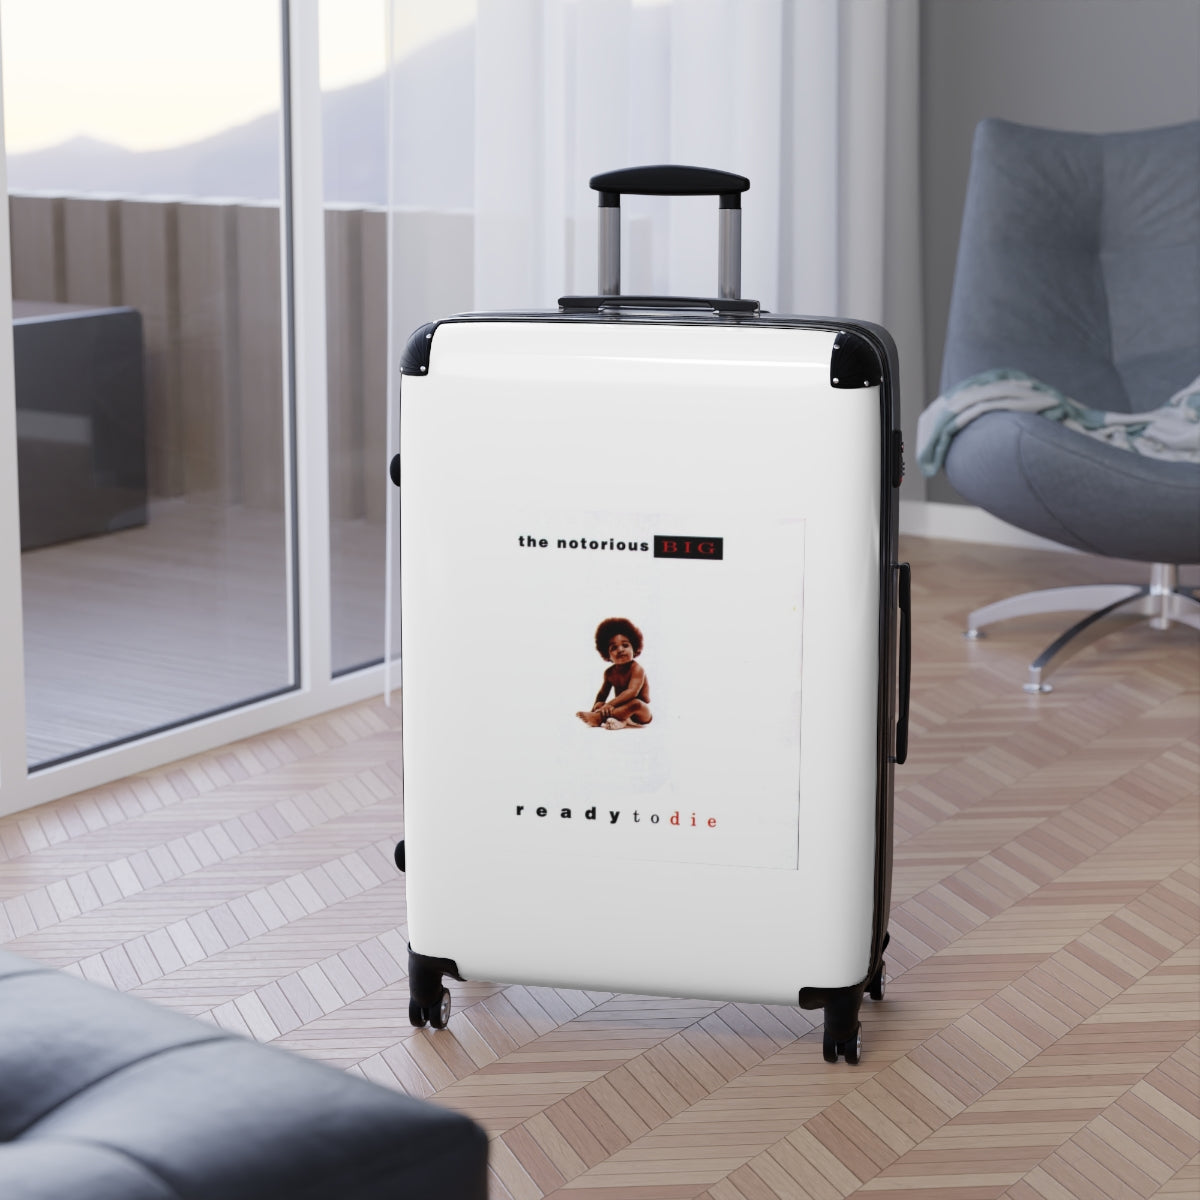 Getrott The Notorious BIG Ready To Die White Cabin Suitcase Extended Storage Adjustable Telescopic Handle Double wheeled Polycarbonate Hard-shell Built-in Lock-Bags-Geotrott